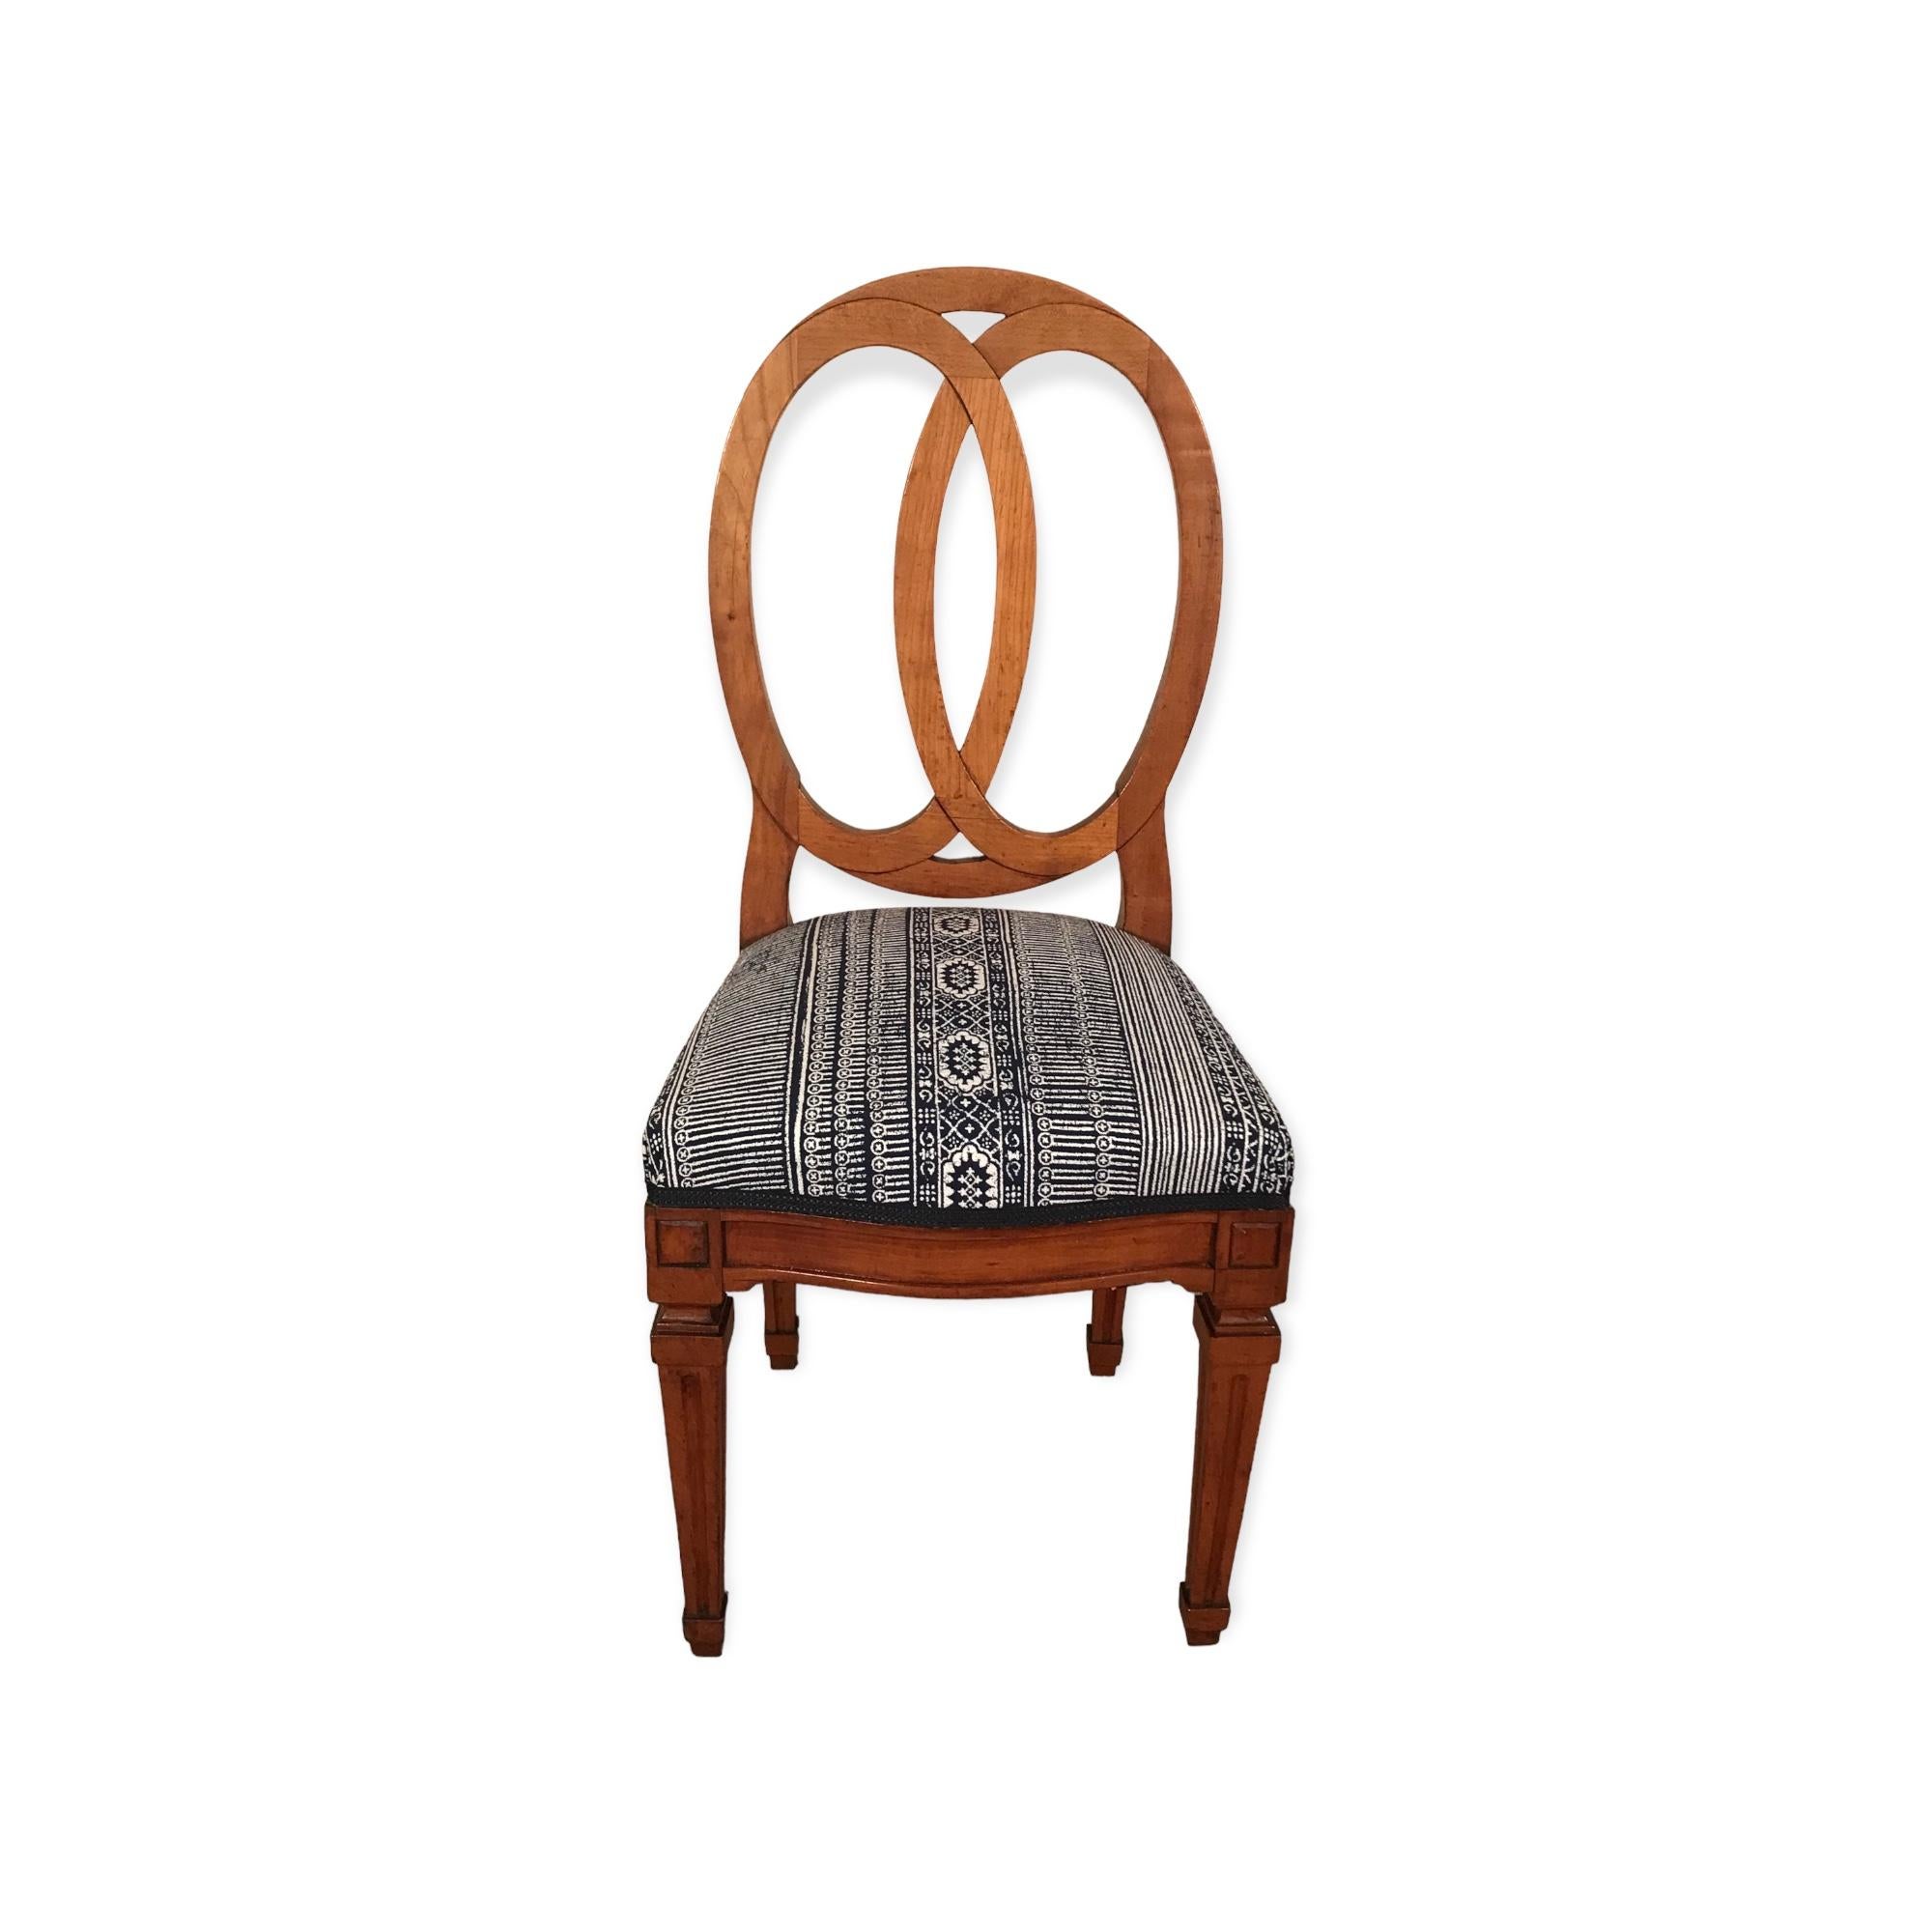 This unique set of four 18th century Louis XVI Chairs comes from Southern Germany. The chairs have a beautiful open back brezel design. They feature a pretty hand carved cherry wood which was carefully refinished without touching the original